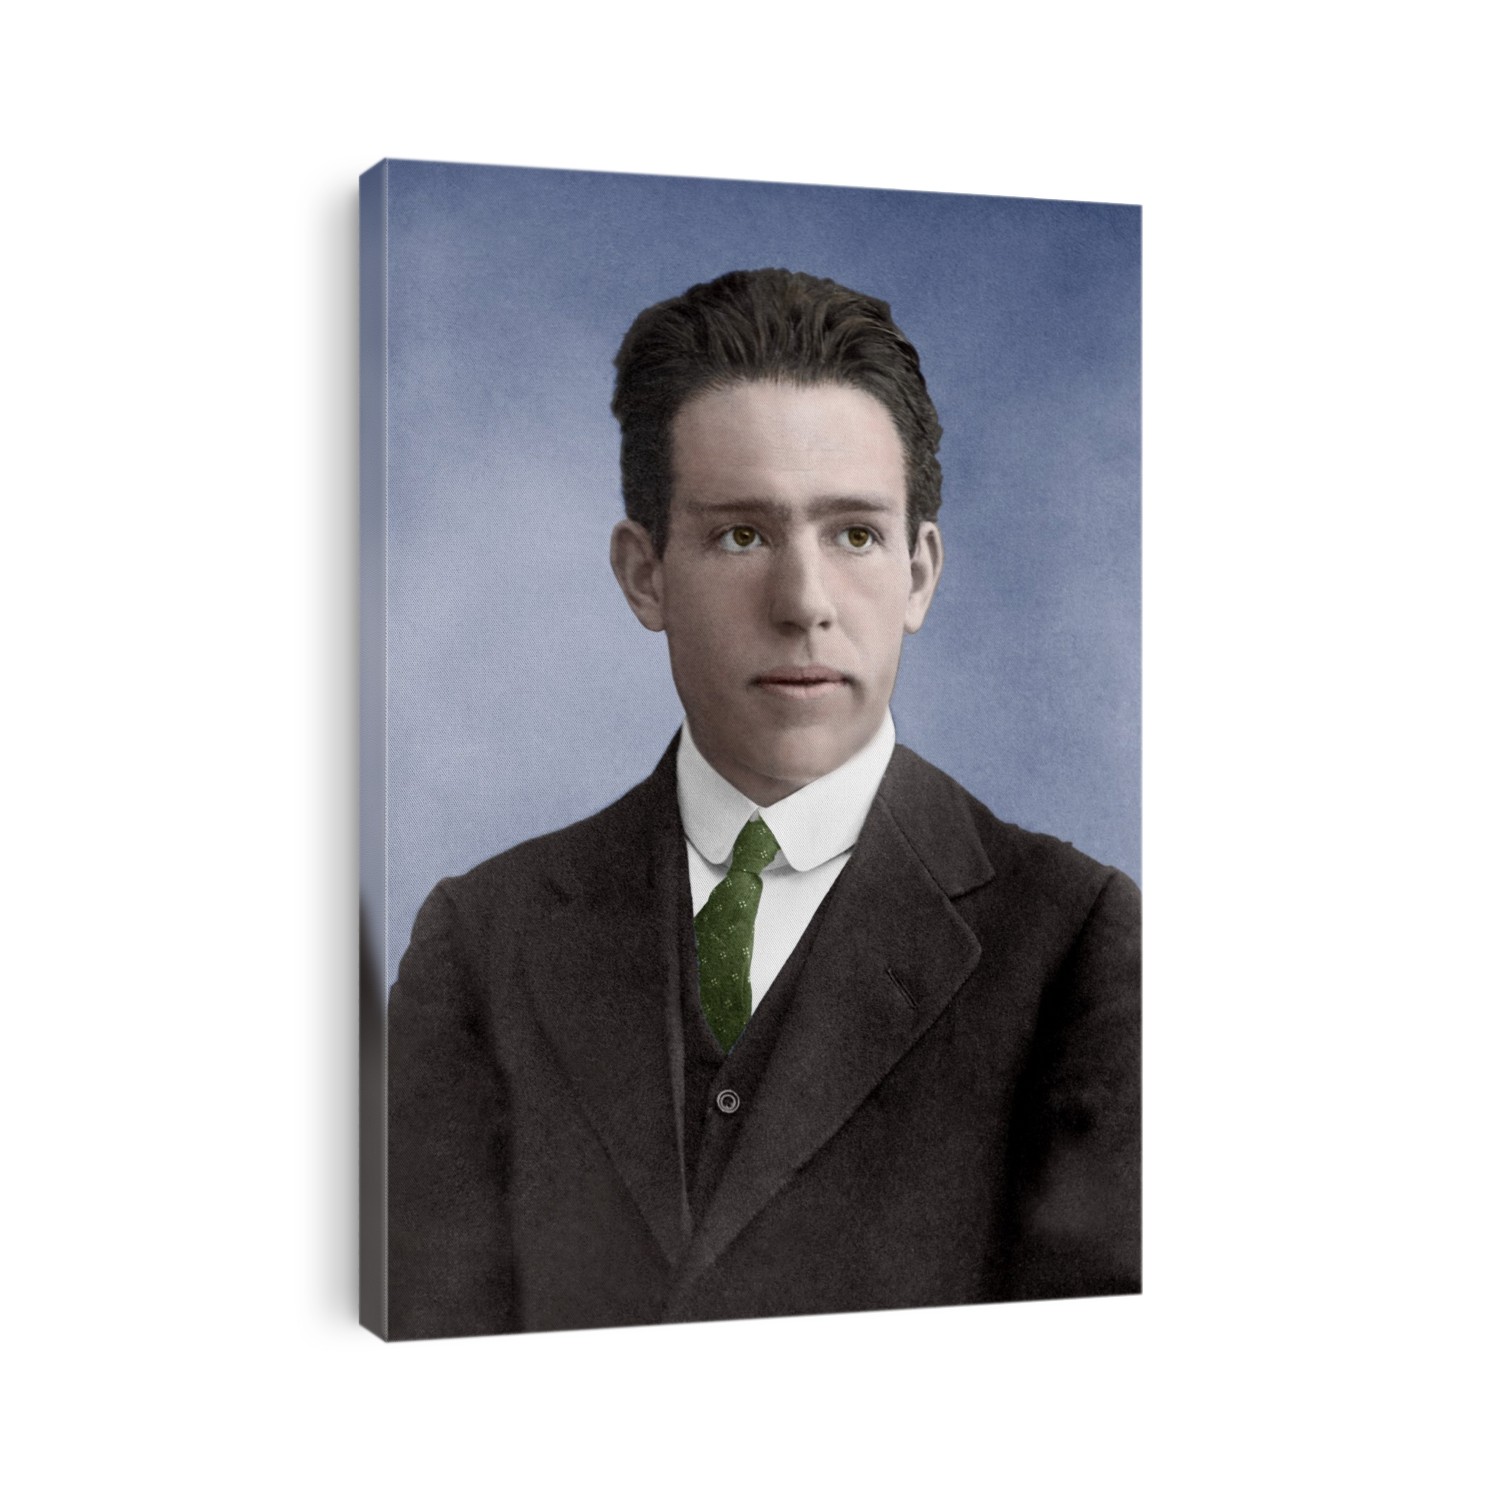 Niels Bohr (1885-1962), Danish physicist and Nobel laureate. Bohr made numerous contributions to physics during his career, but it was his work on the structure of atoms that won him the 1922 Nobel Prize. Following Ernest Rutherford's discovery of the nucleus, Bohr described the atom as a small, positively charged nucleus surrounded by waves of electrons with discrete (quantised) energies. Though associated with the Manhattan Project in World War II, he dedicated his later life to peaceful applications of atomic physics.